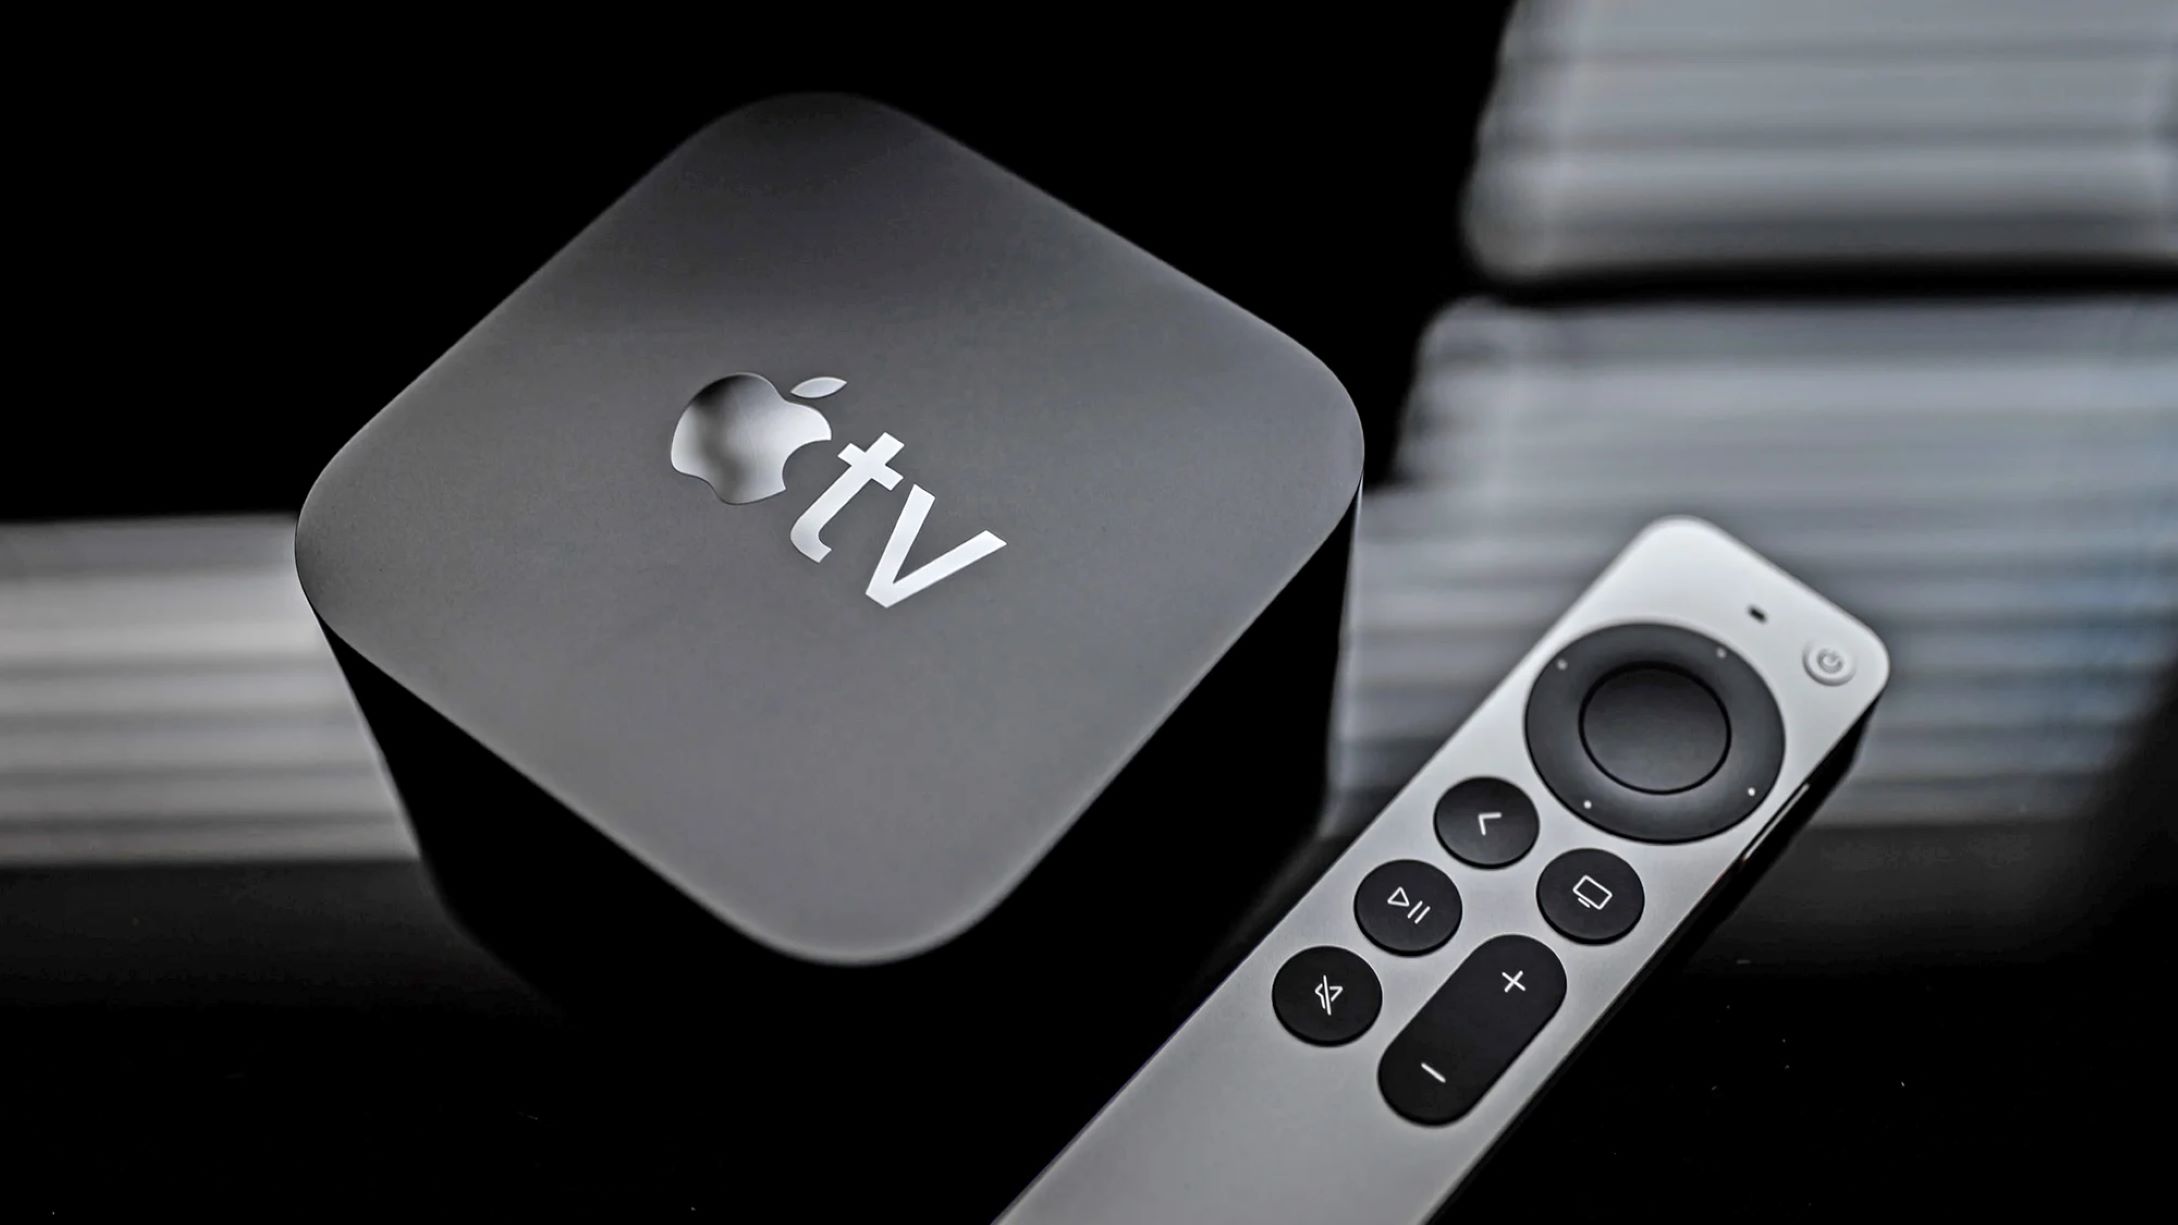 How To Access The Internet On Apple TV